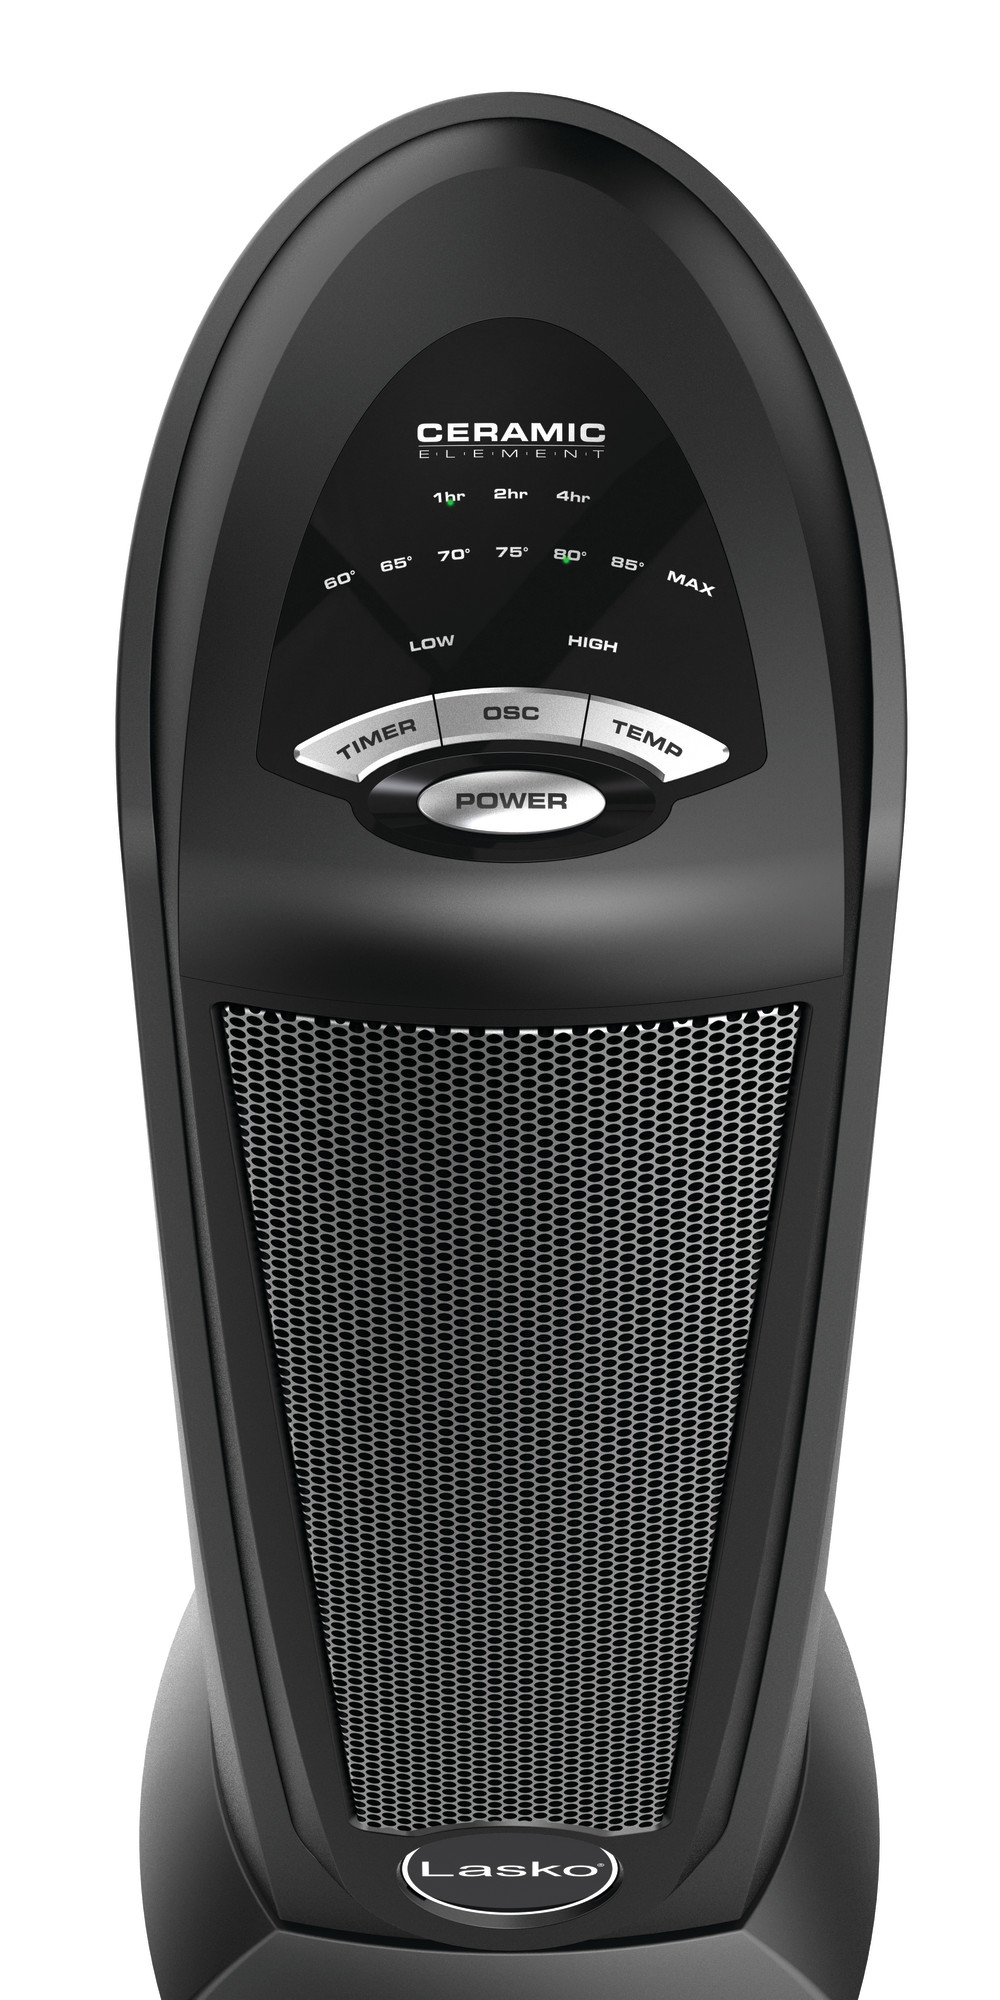 Lasko 22.5" 1500W Oscillating Ceramic Tower Space Heater with Remote, Black, CT22410, New - image 3 of 7